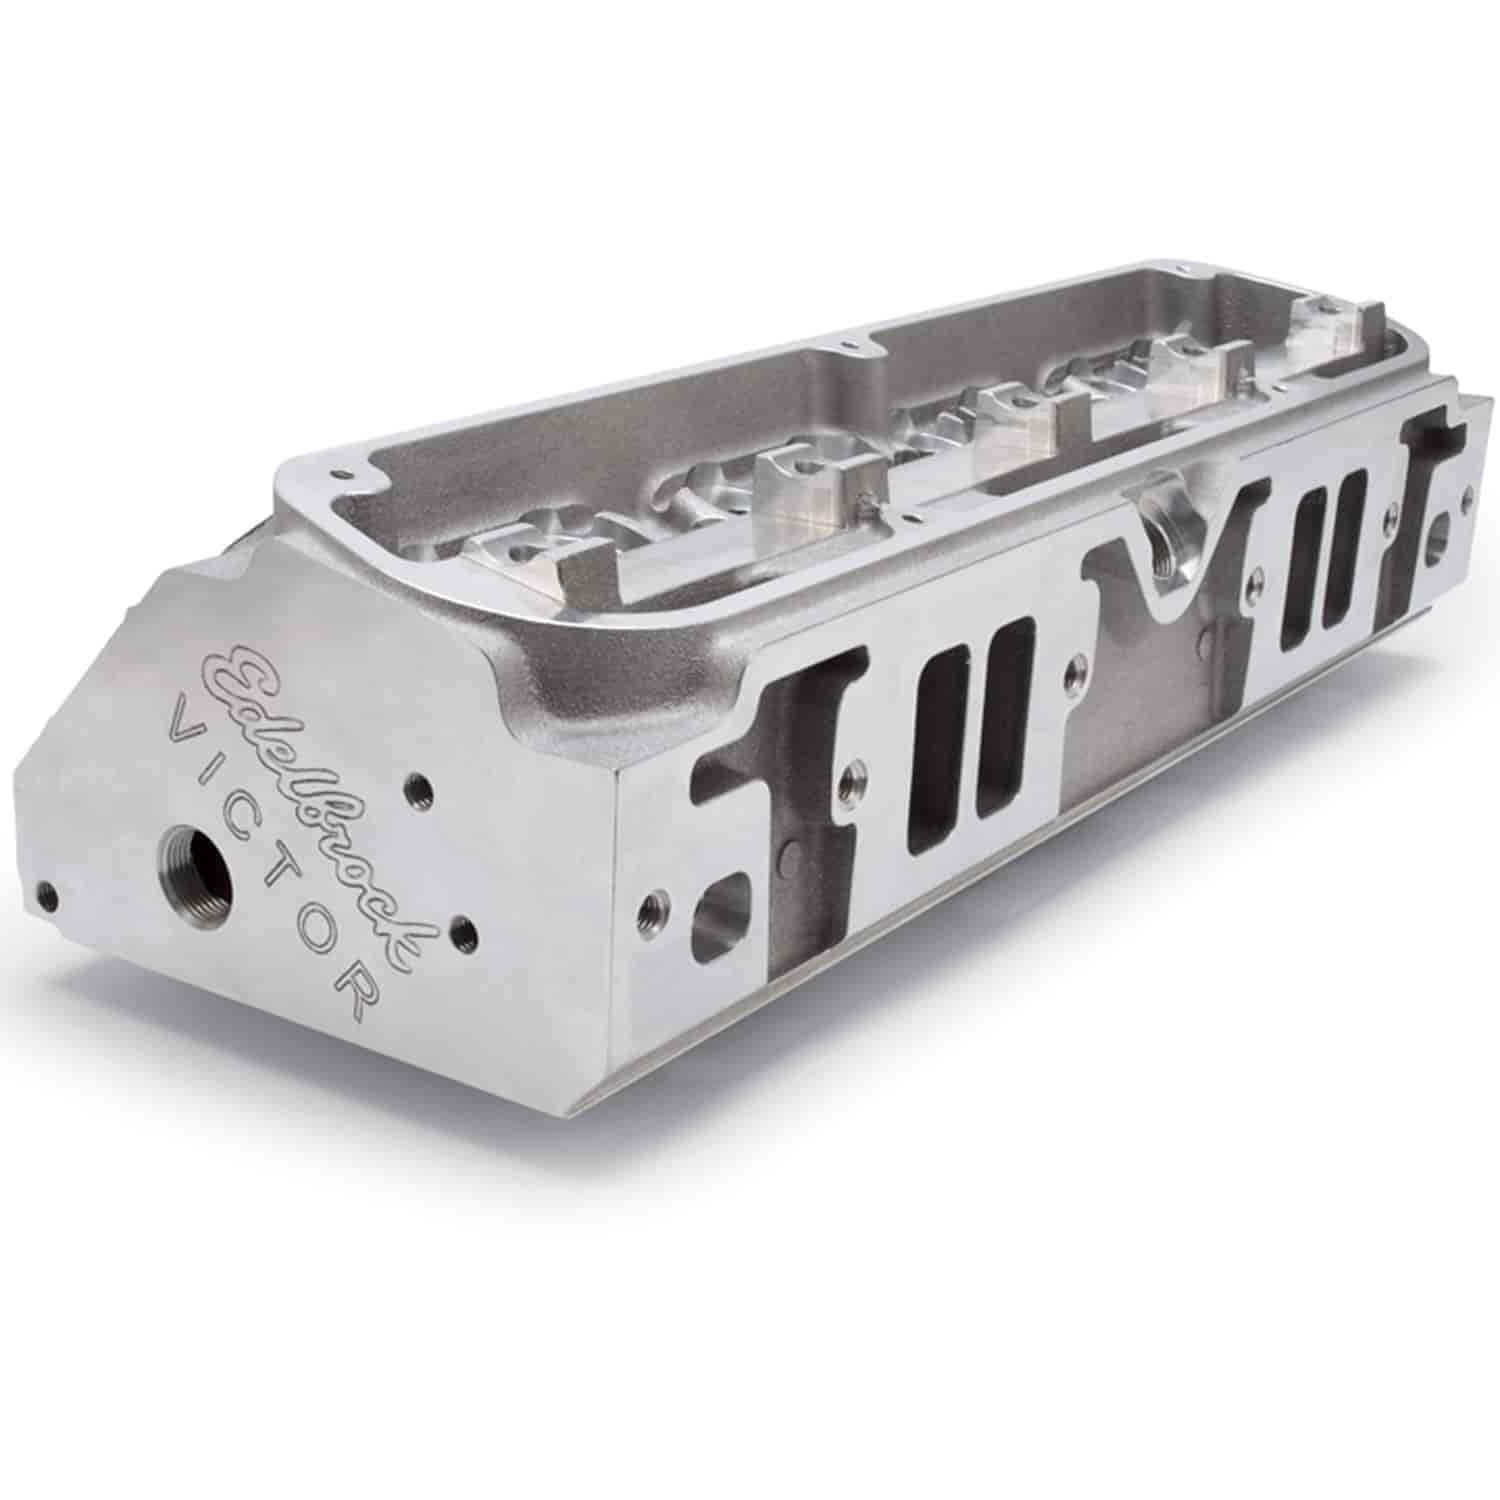 Pro Port Raw Victor 16 Degree Cylinder Head for Small Block Chrysler